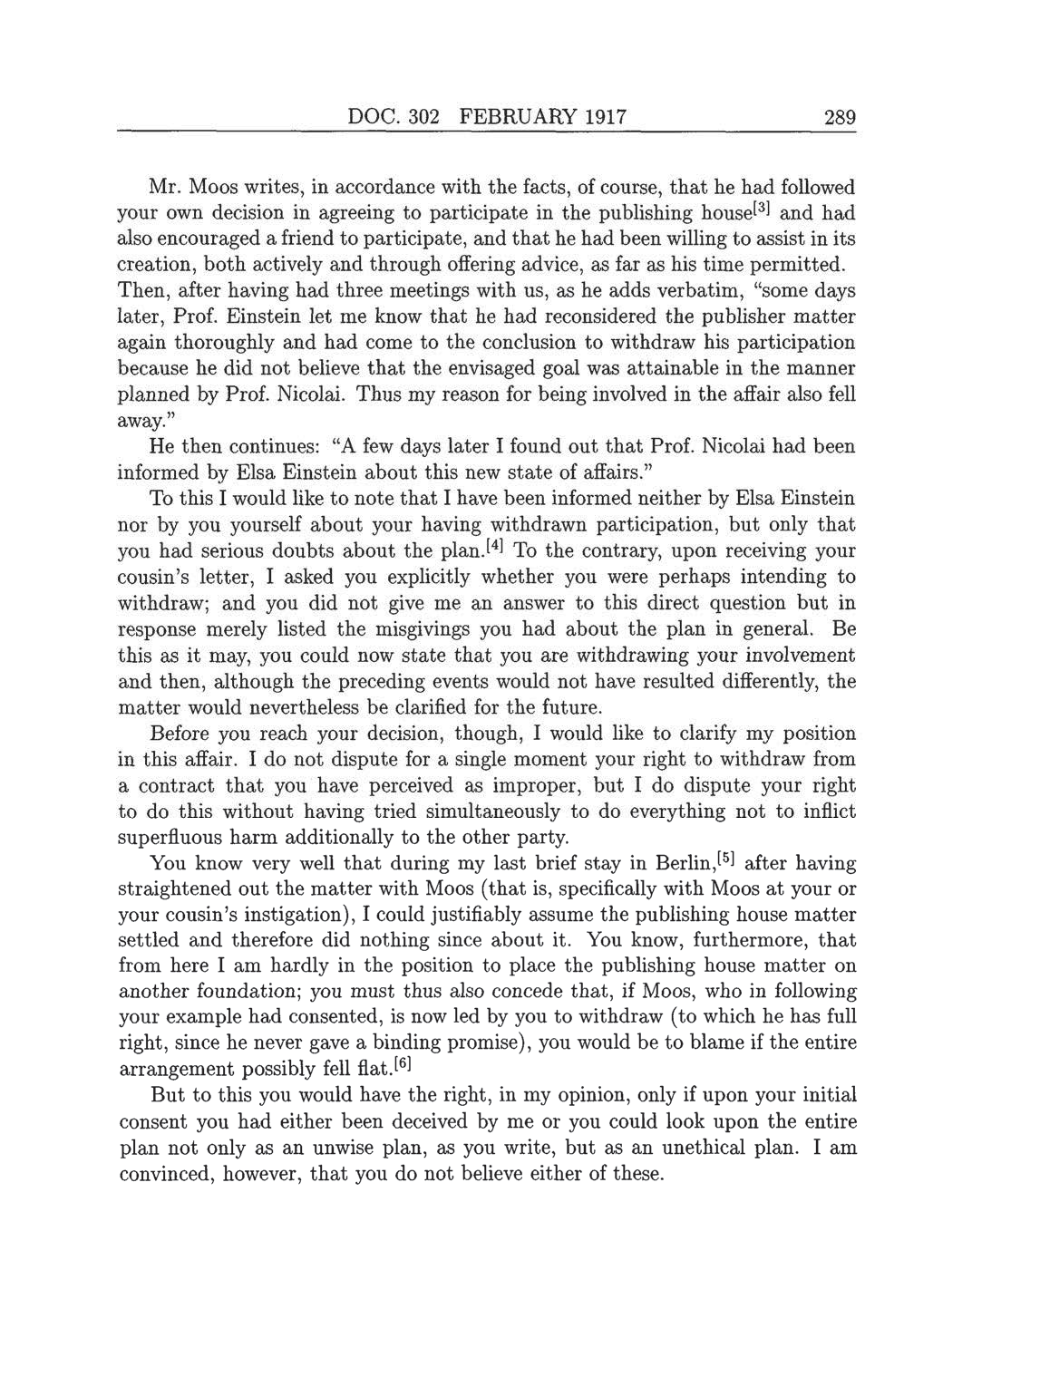 Volume 8: The Berlin Years: Correspondence, 1914-1918 (English translation supplement) page 289